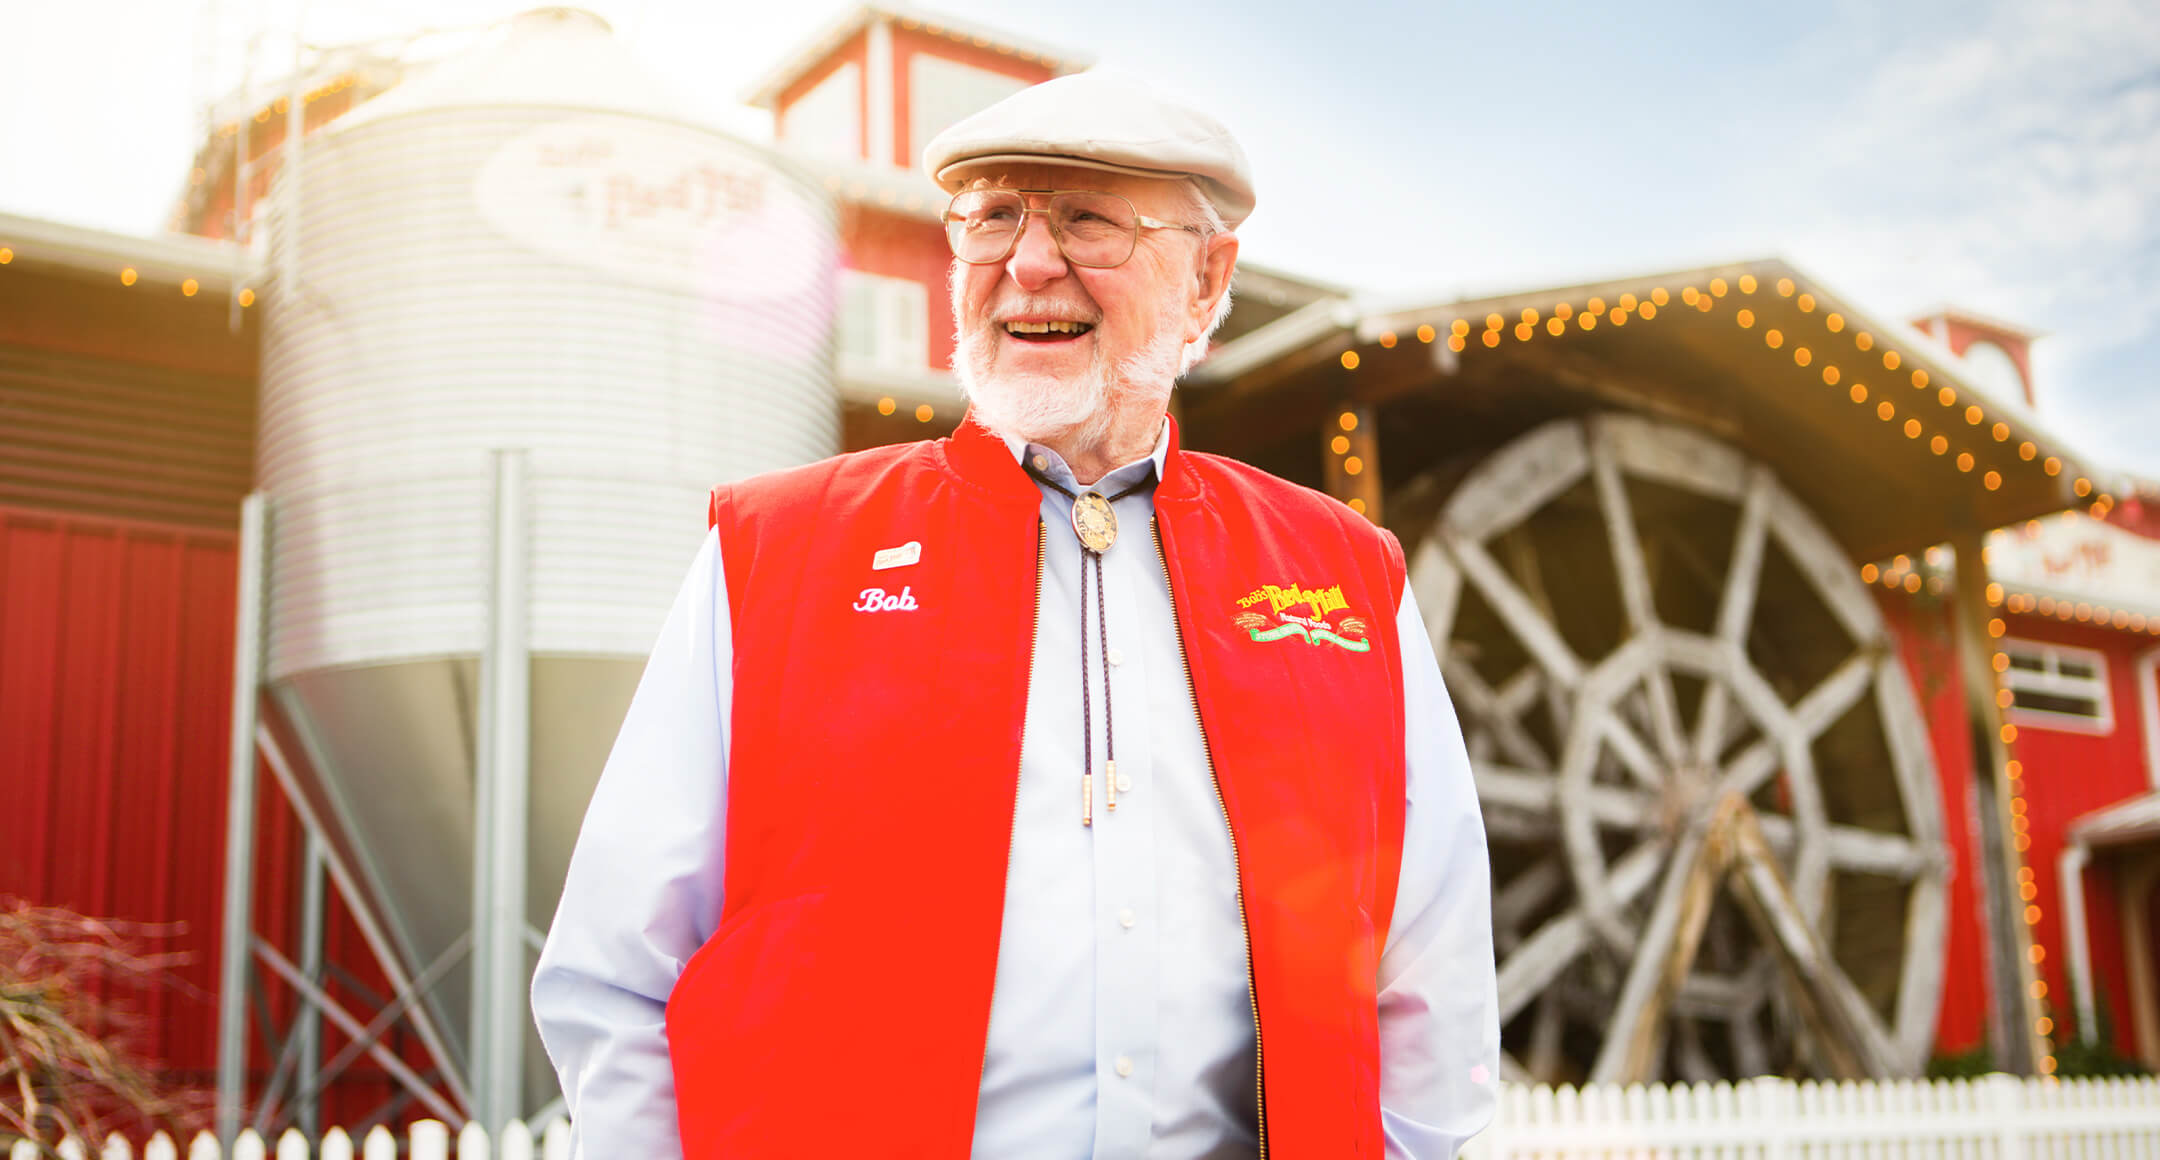 An image of Bob Moore of Bob's Red Mill Natural Foods wearing a red vest. 